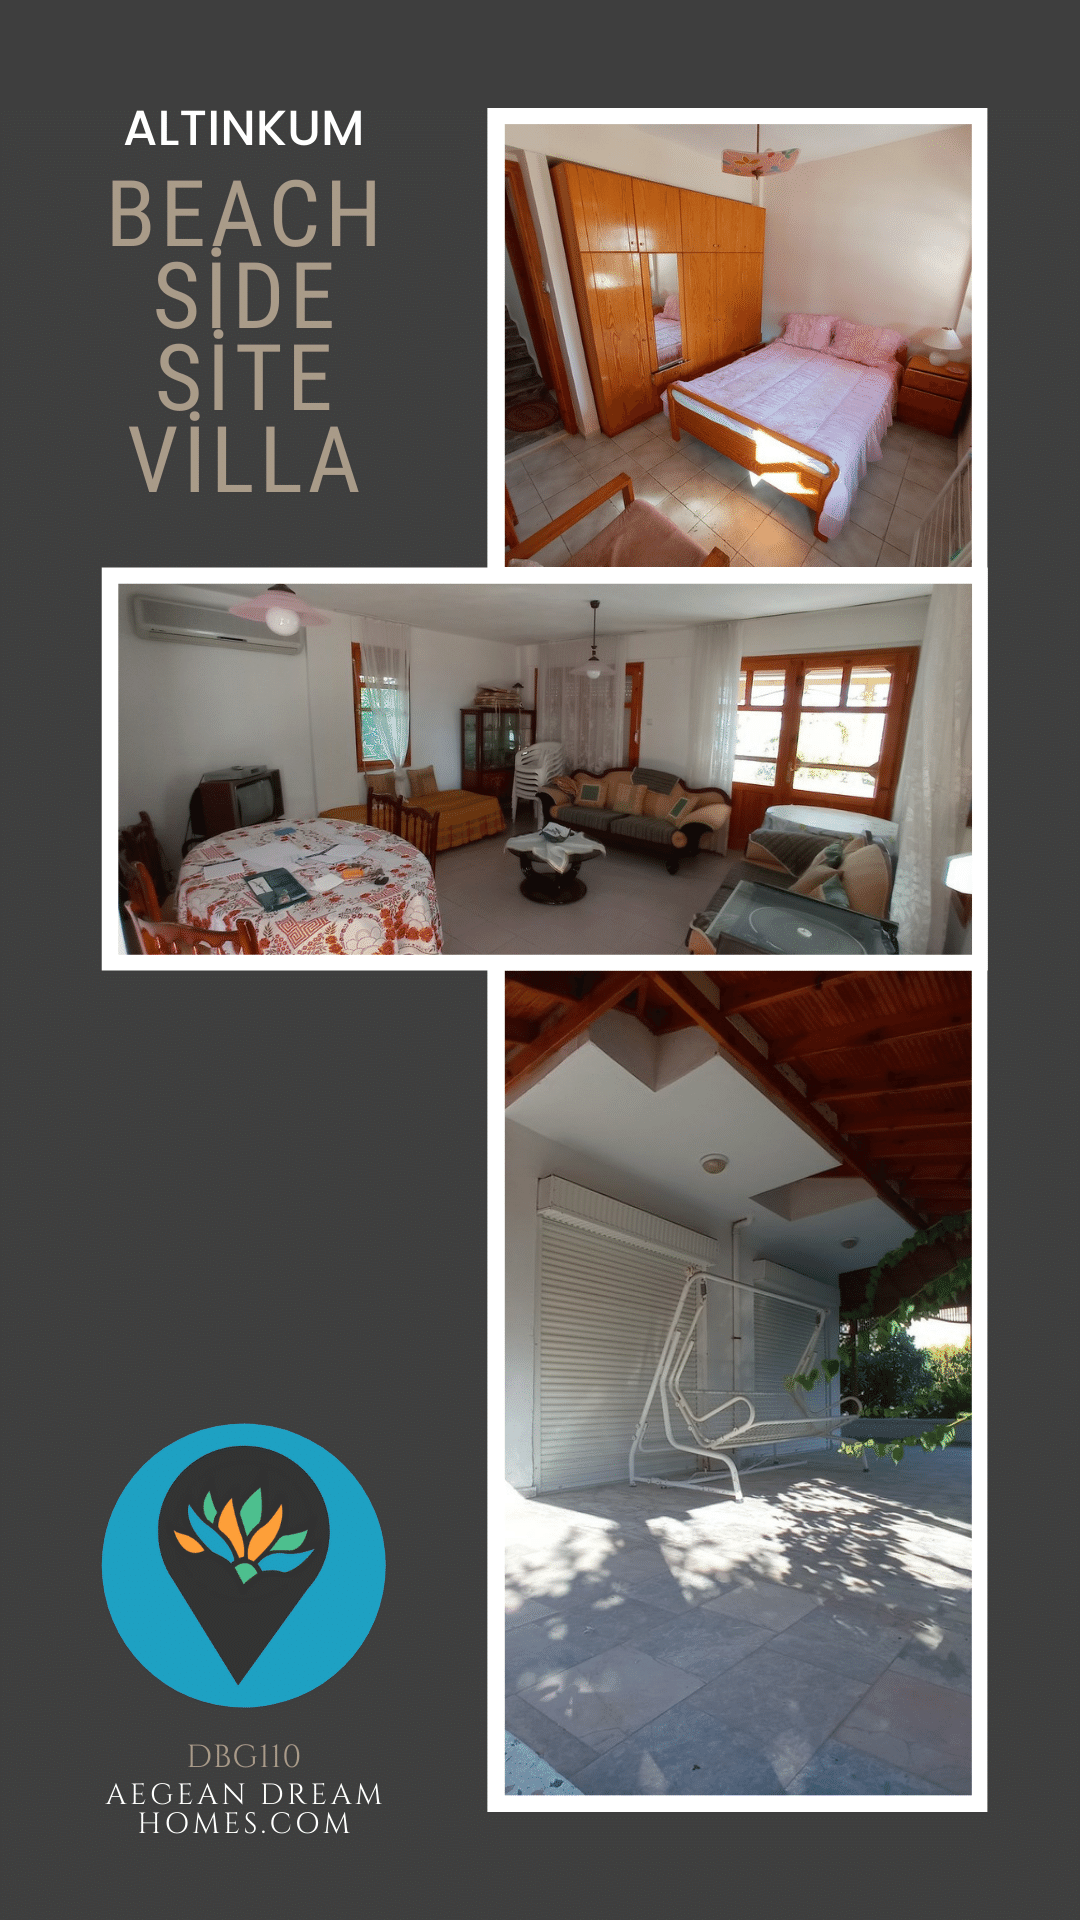 Featured property header for DBG110. Text overlay reads: Altinkum Beach Side Site Villa For Sale Picture shows the cheap villa for sale with original furnitures and decor pre renovation. Plus Aegean Dream Homes logo